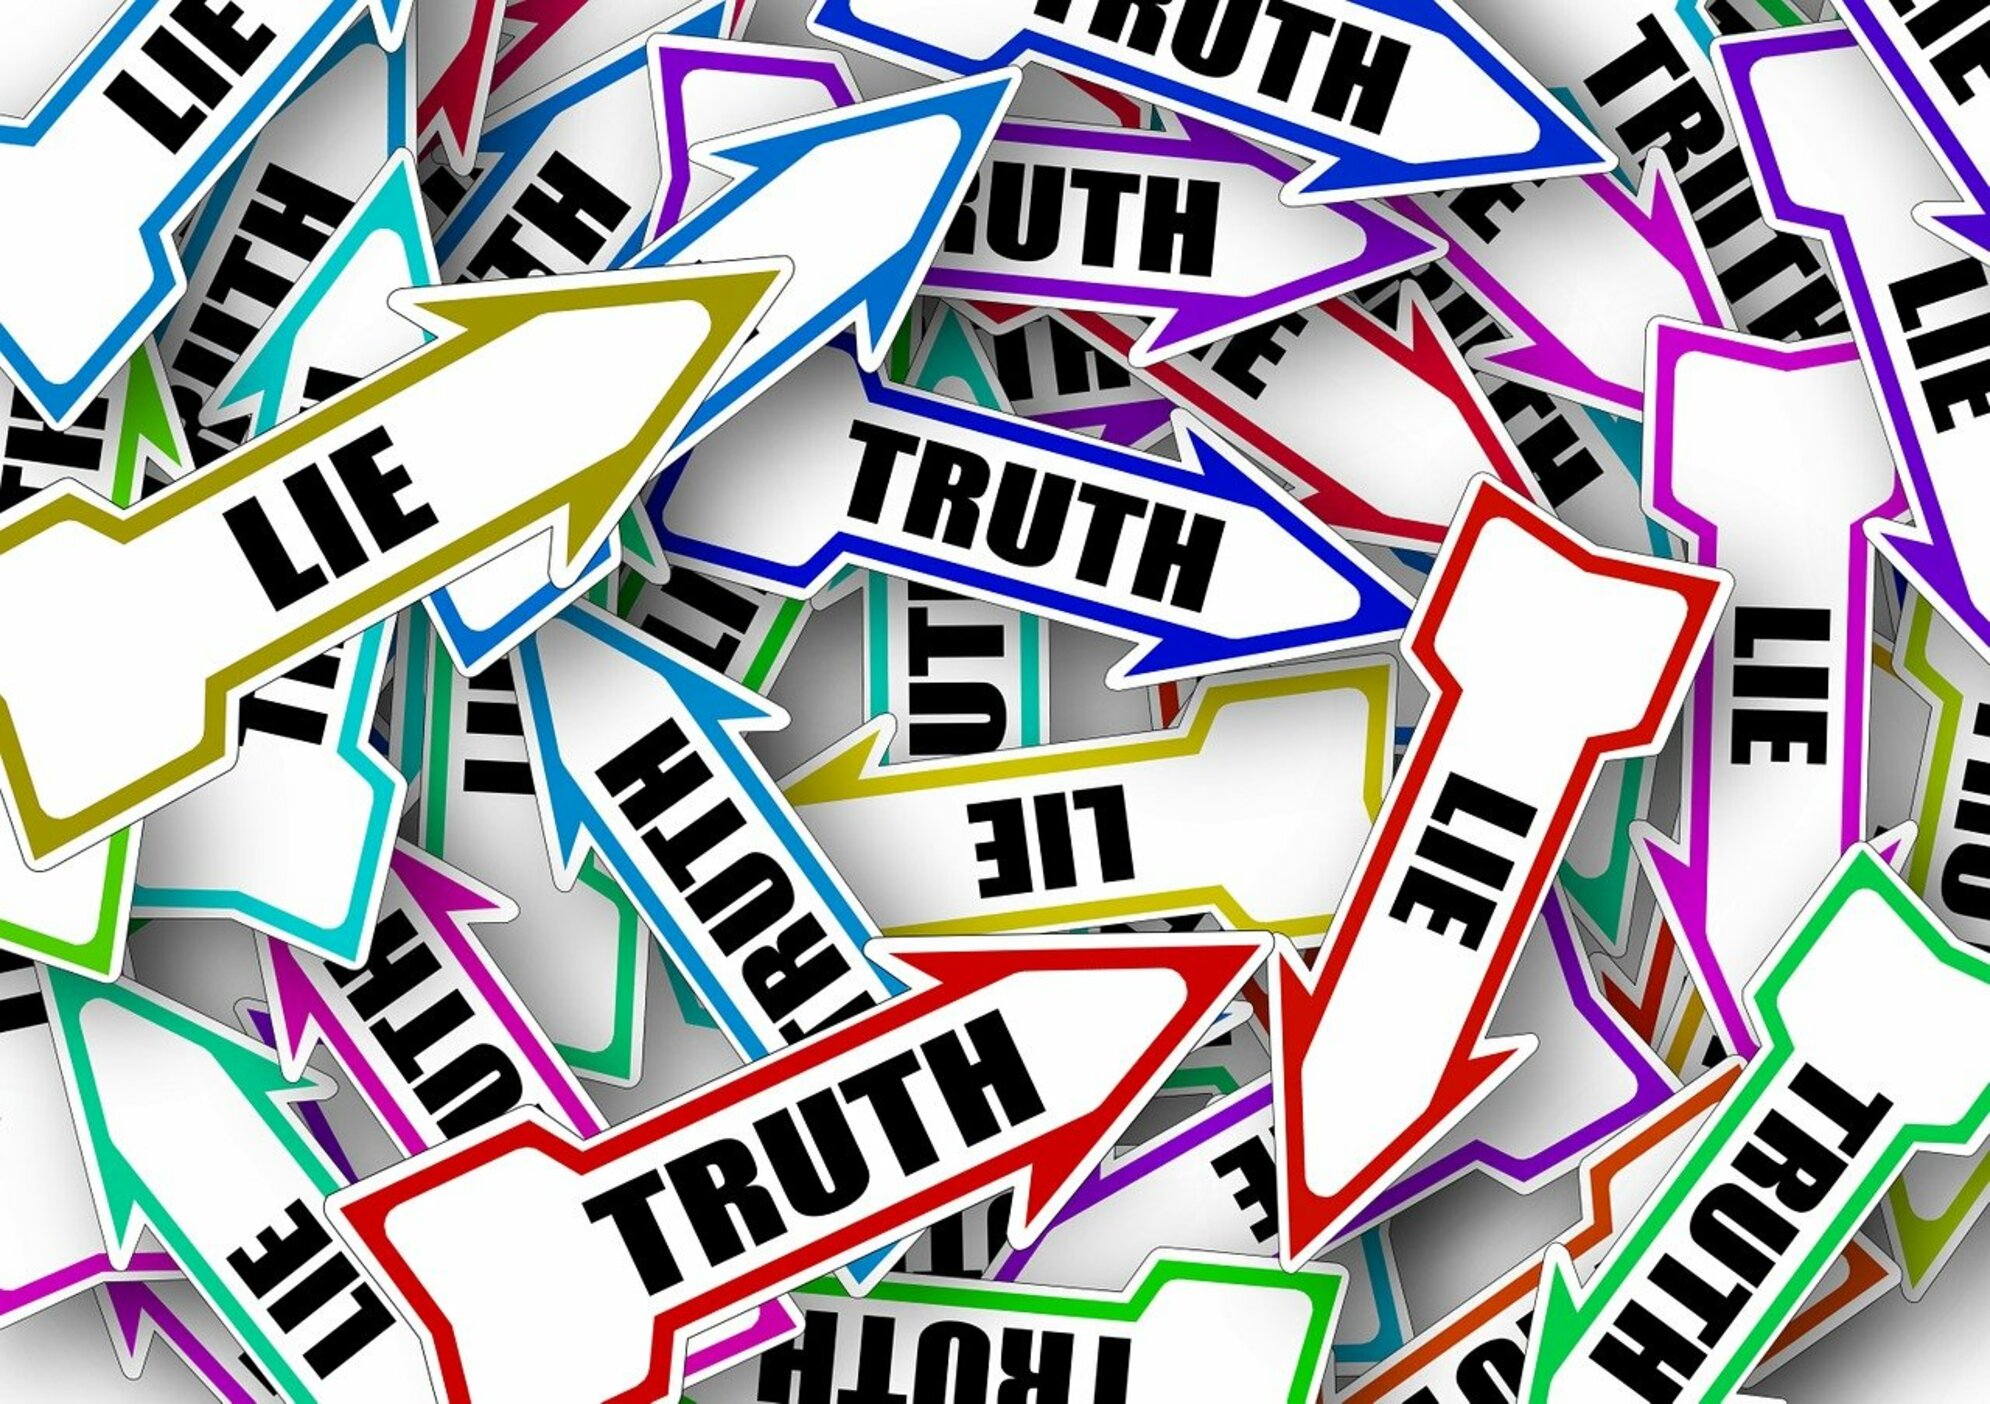 Arrows typed "Truth" and "Lie".